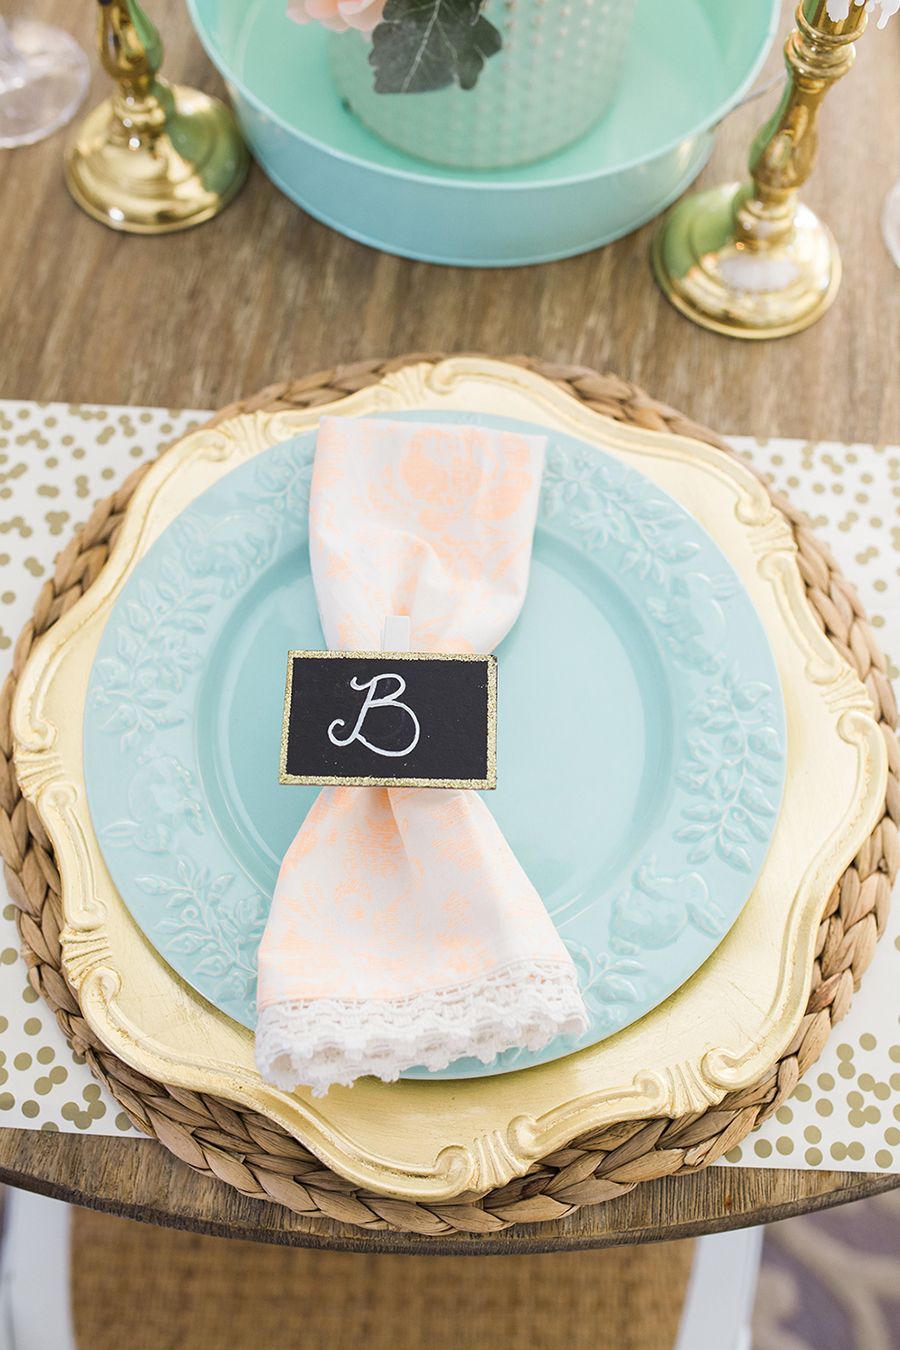 Easter Decorating Ideas tablescape charger placemats plates